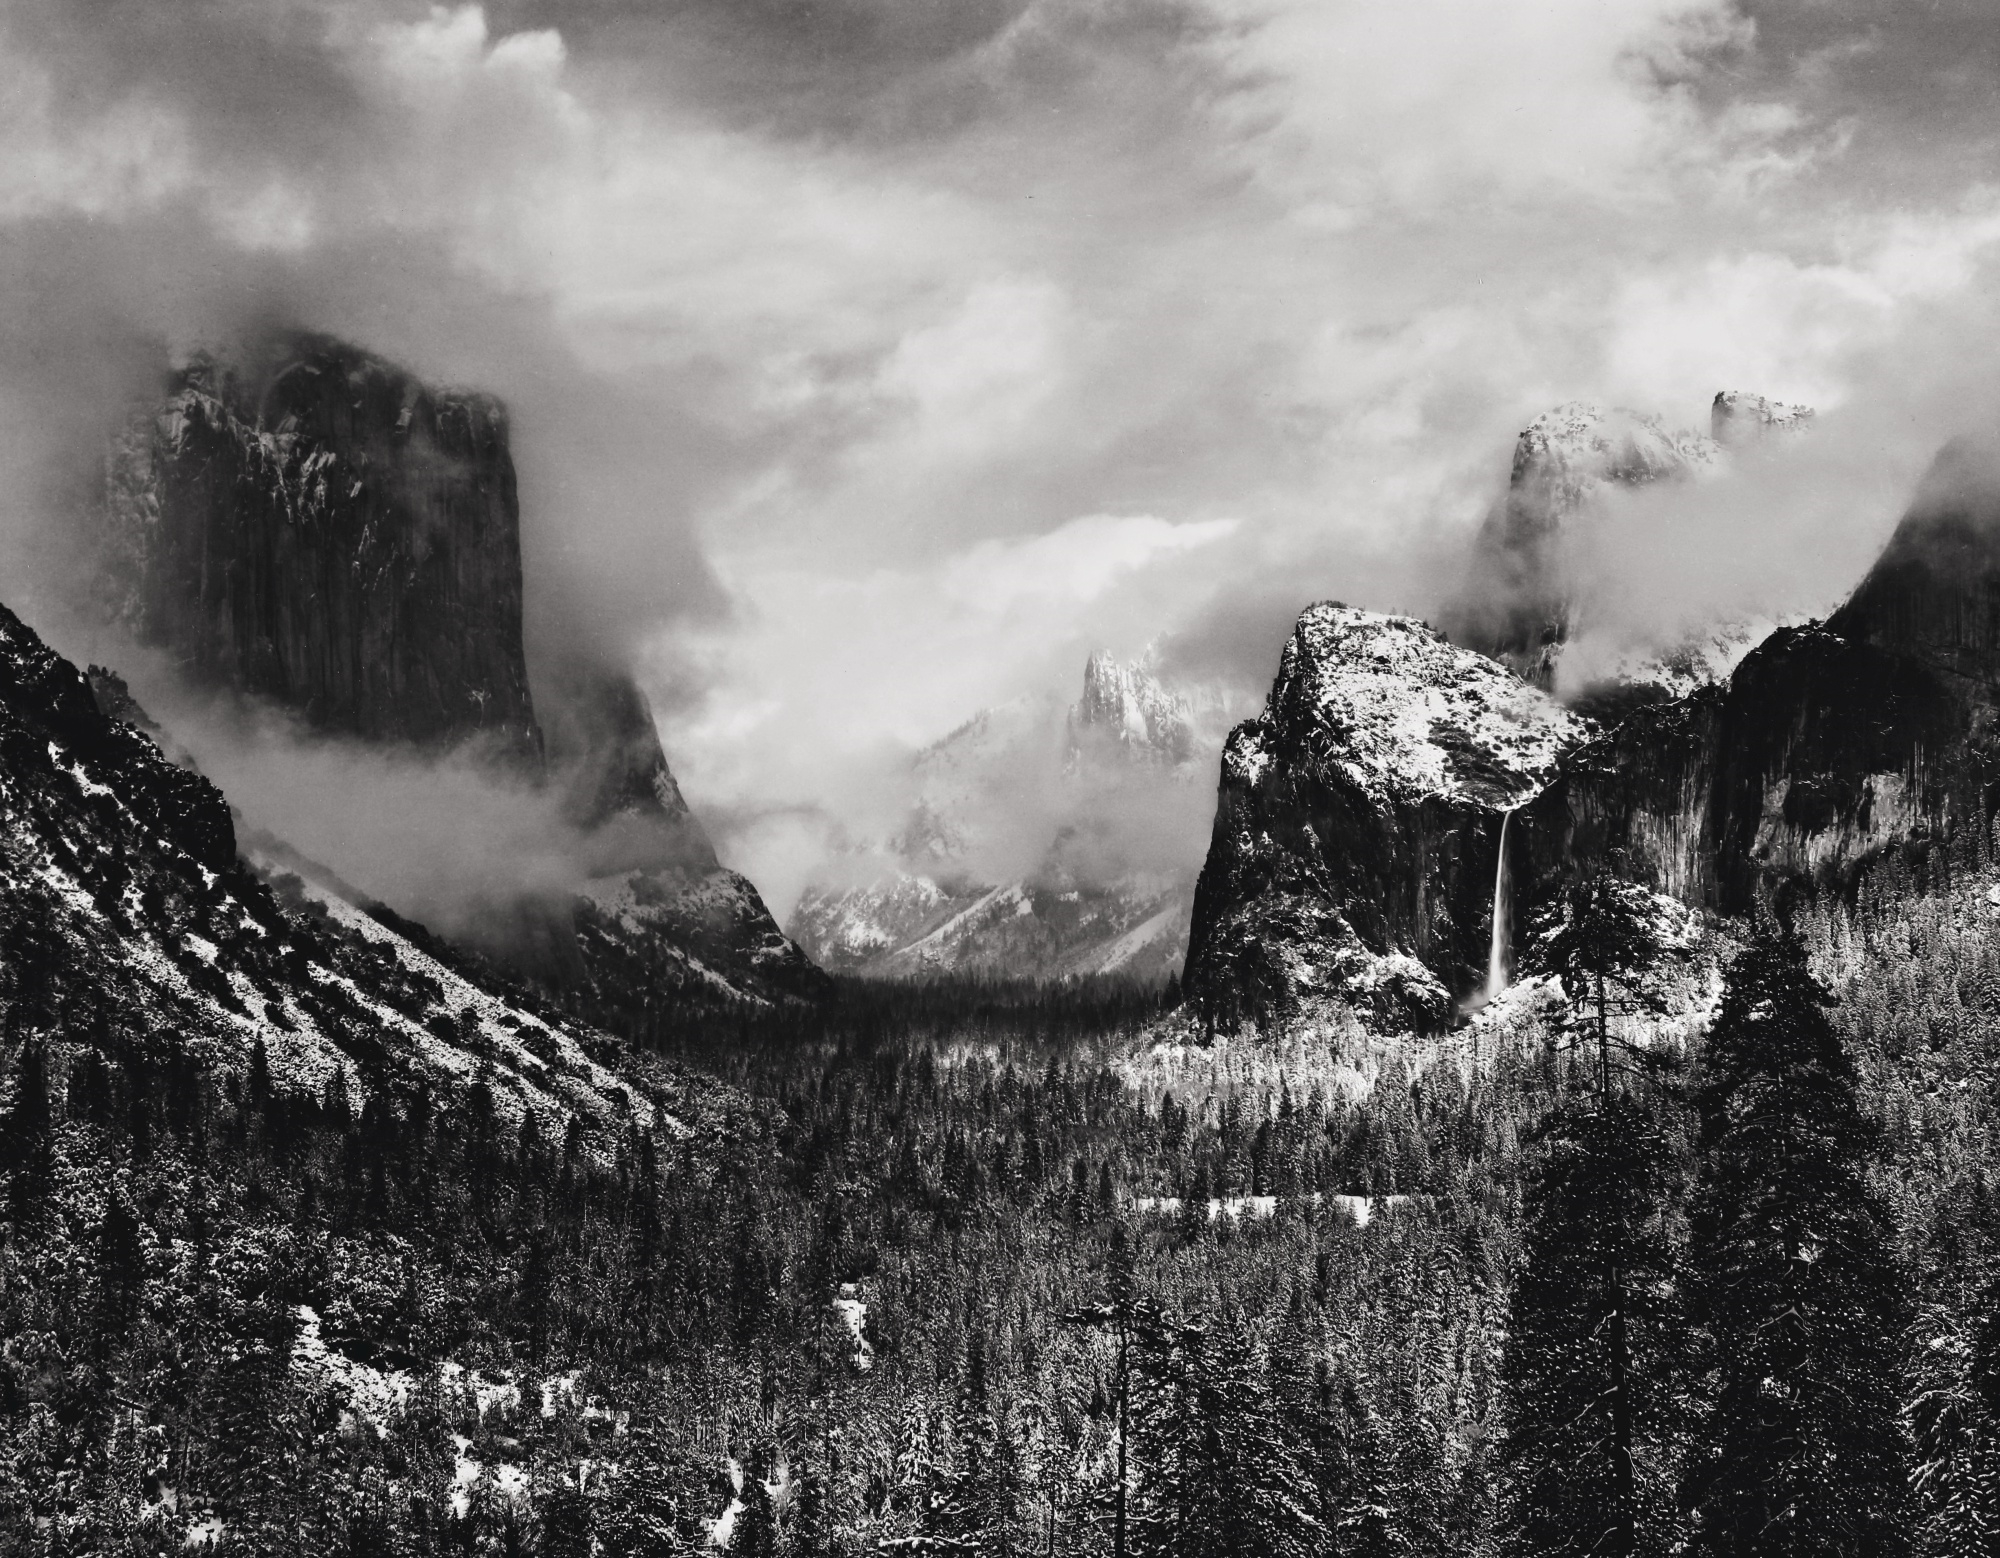 WINTER STORM, YOSEMITE VALLEY (CLEARING WINTER STORM)